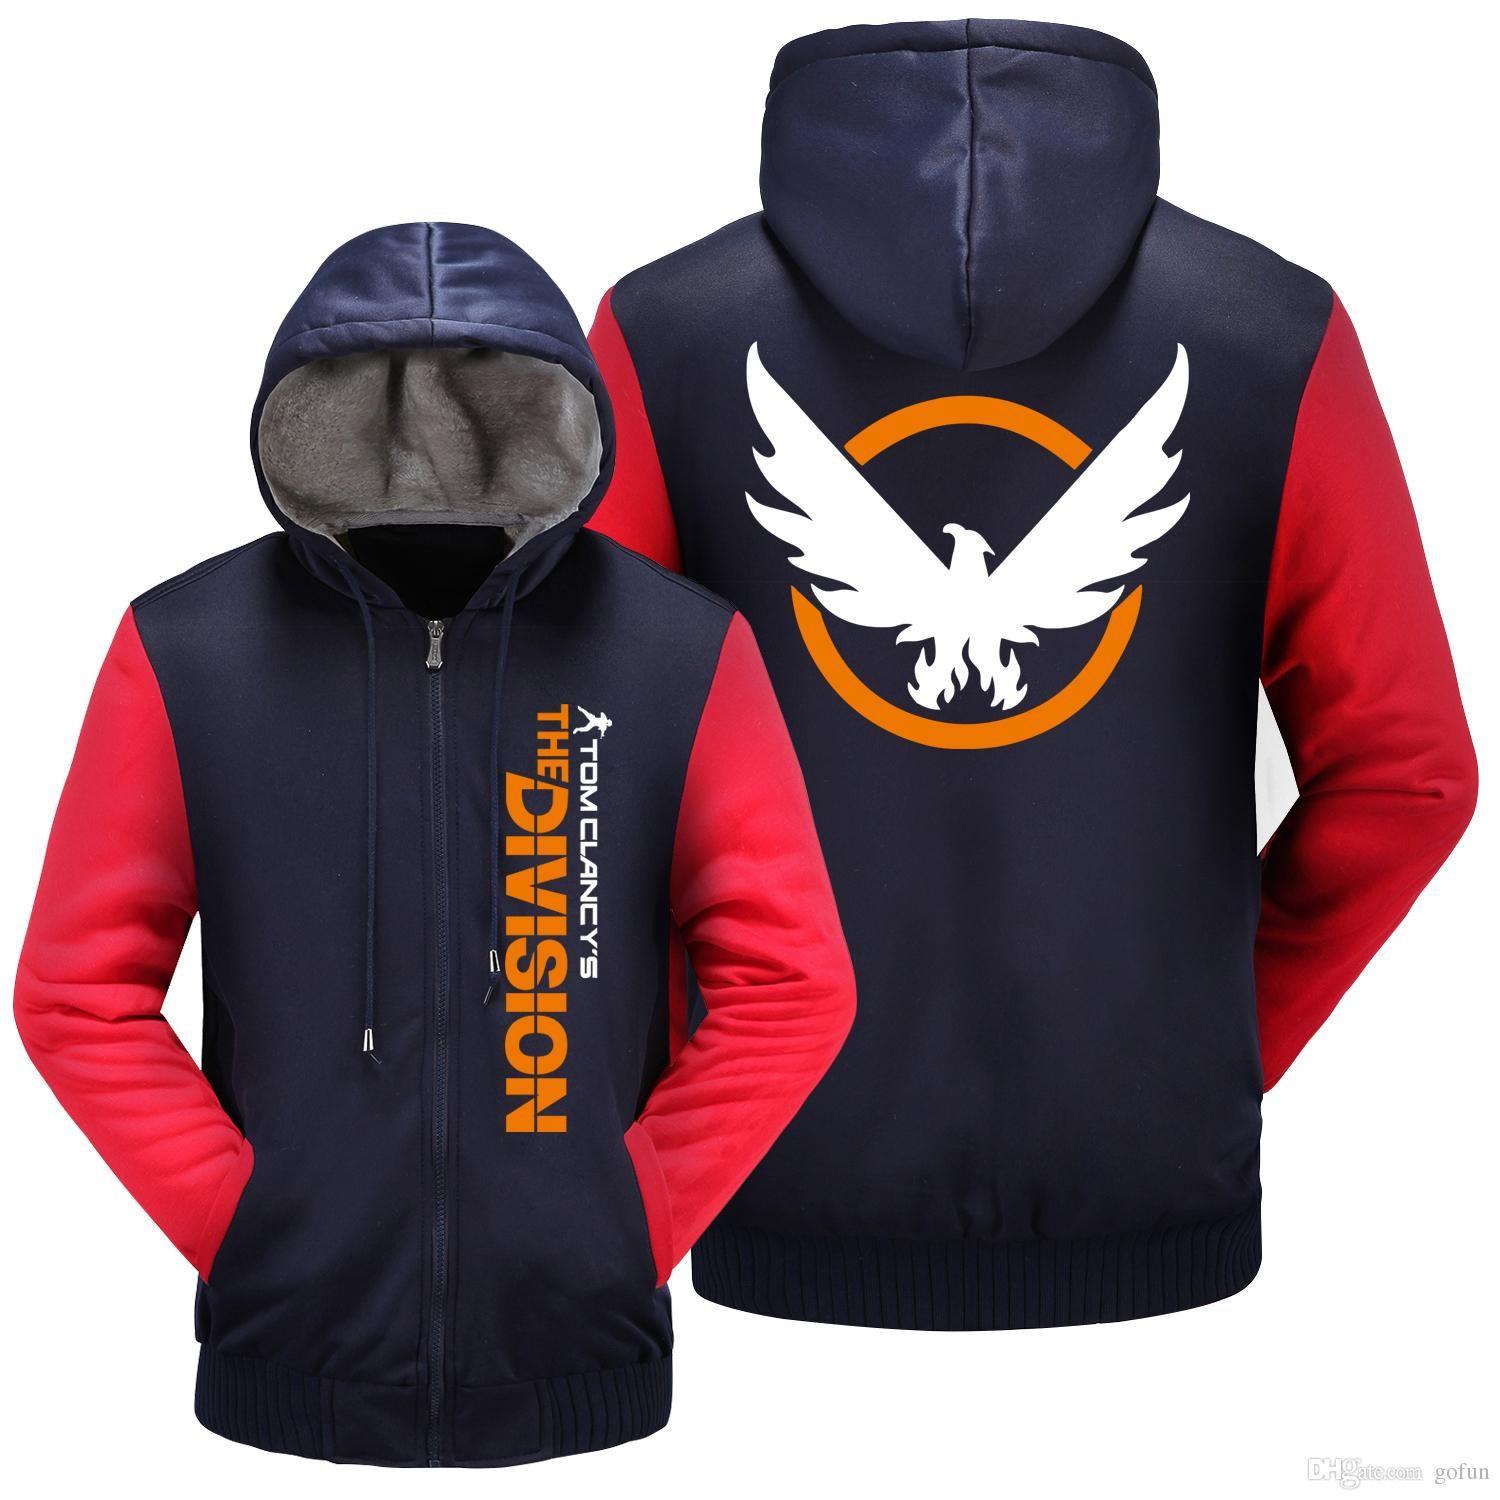 The Division Shd Logo - Game Tom Clancy'S The Division SHD Logo Hoodies Zip Up Printing